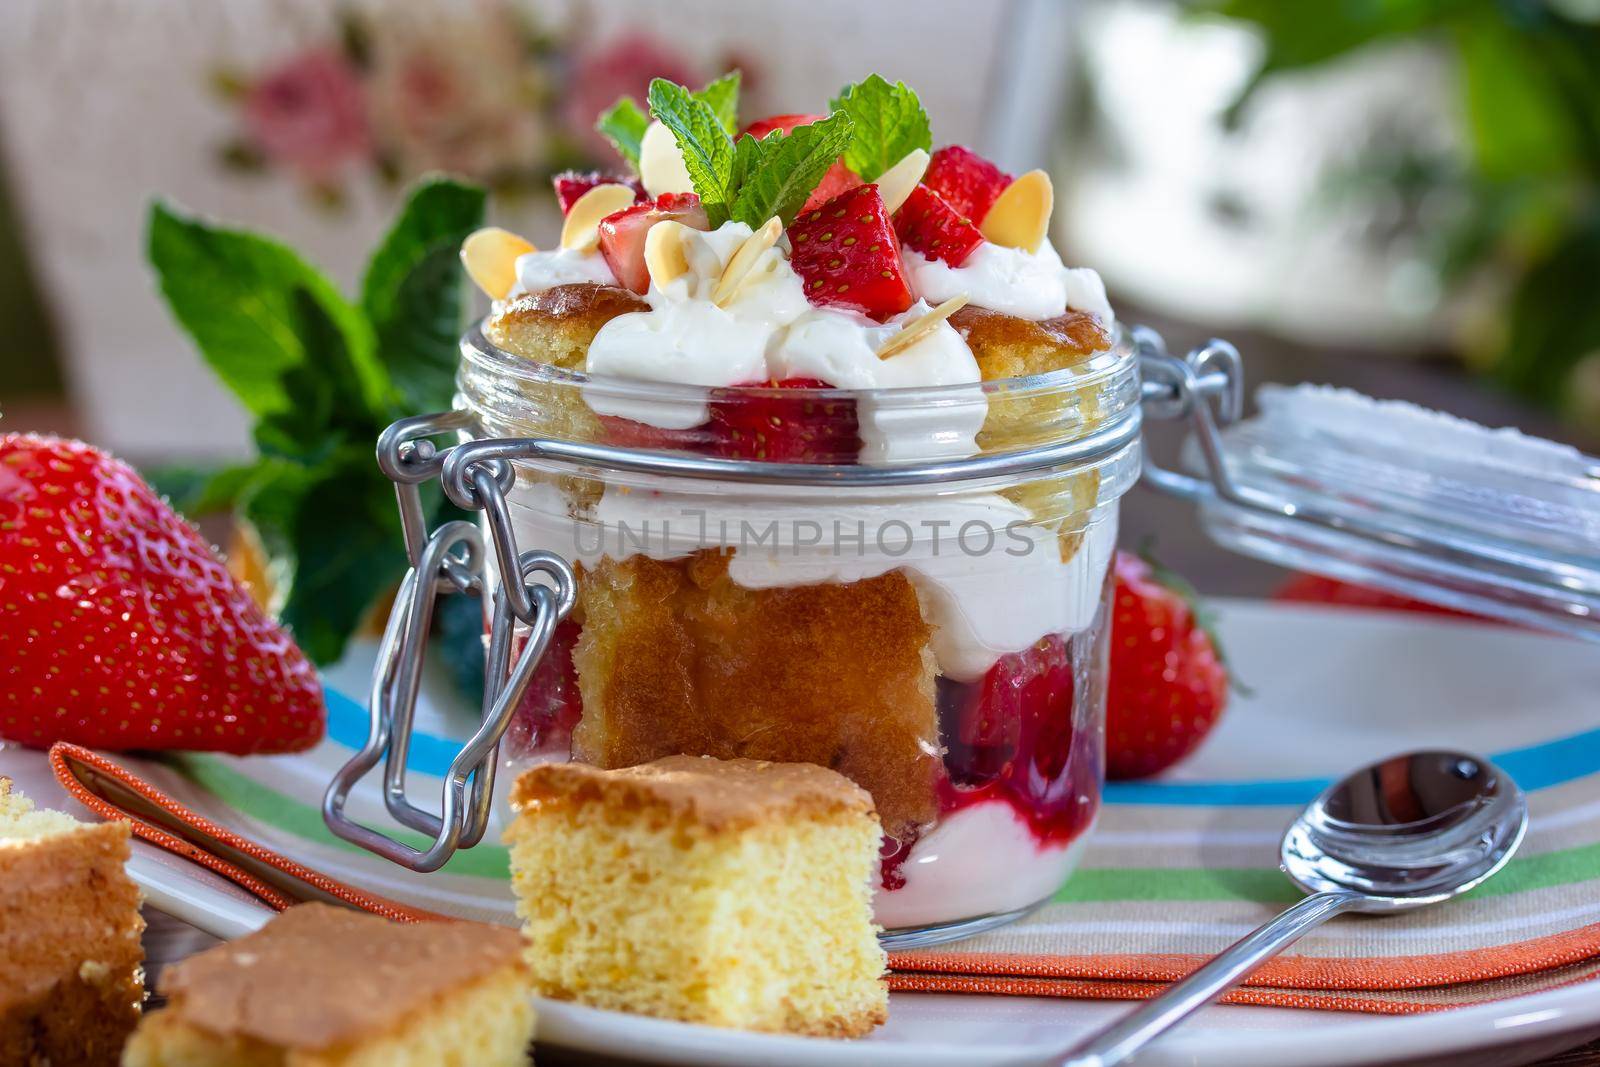 Layered Dessert of chocolate sponge cake, whipped cream or ricotta and fresh strawberries in a glass bowl. Trifle. Delicious gourmet breakfast. Selective Focus, copy space